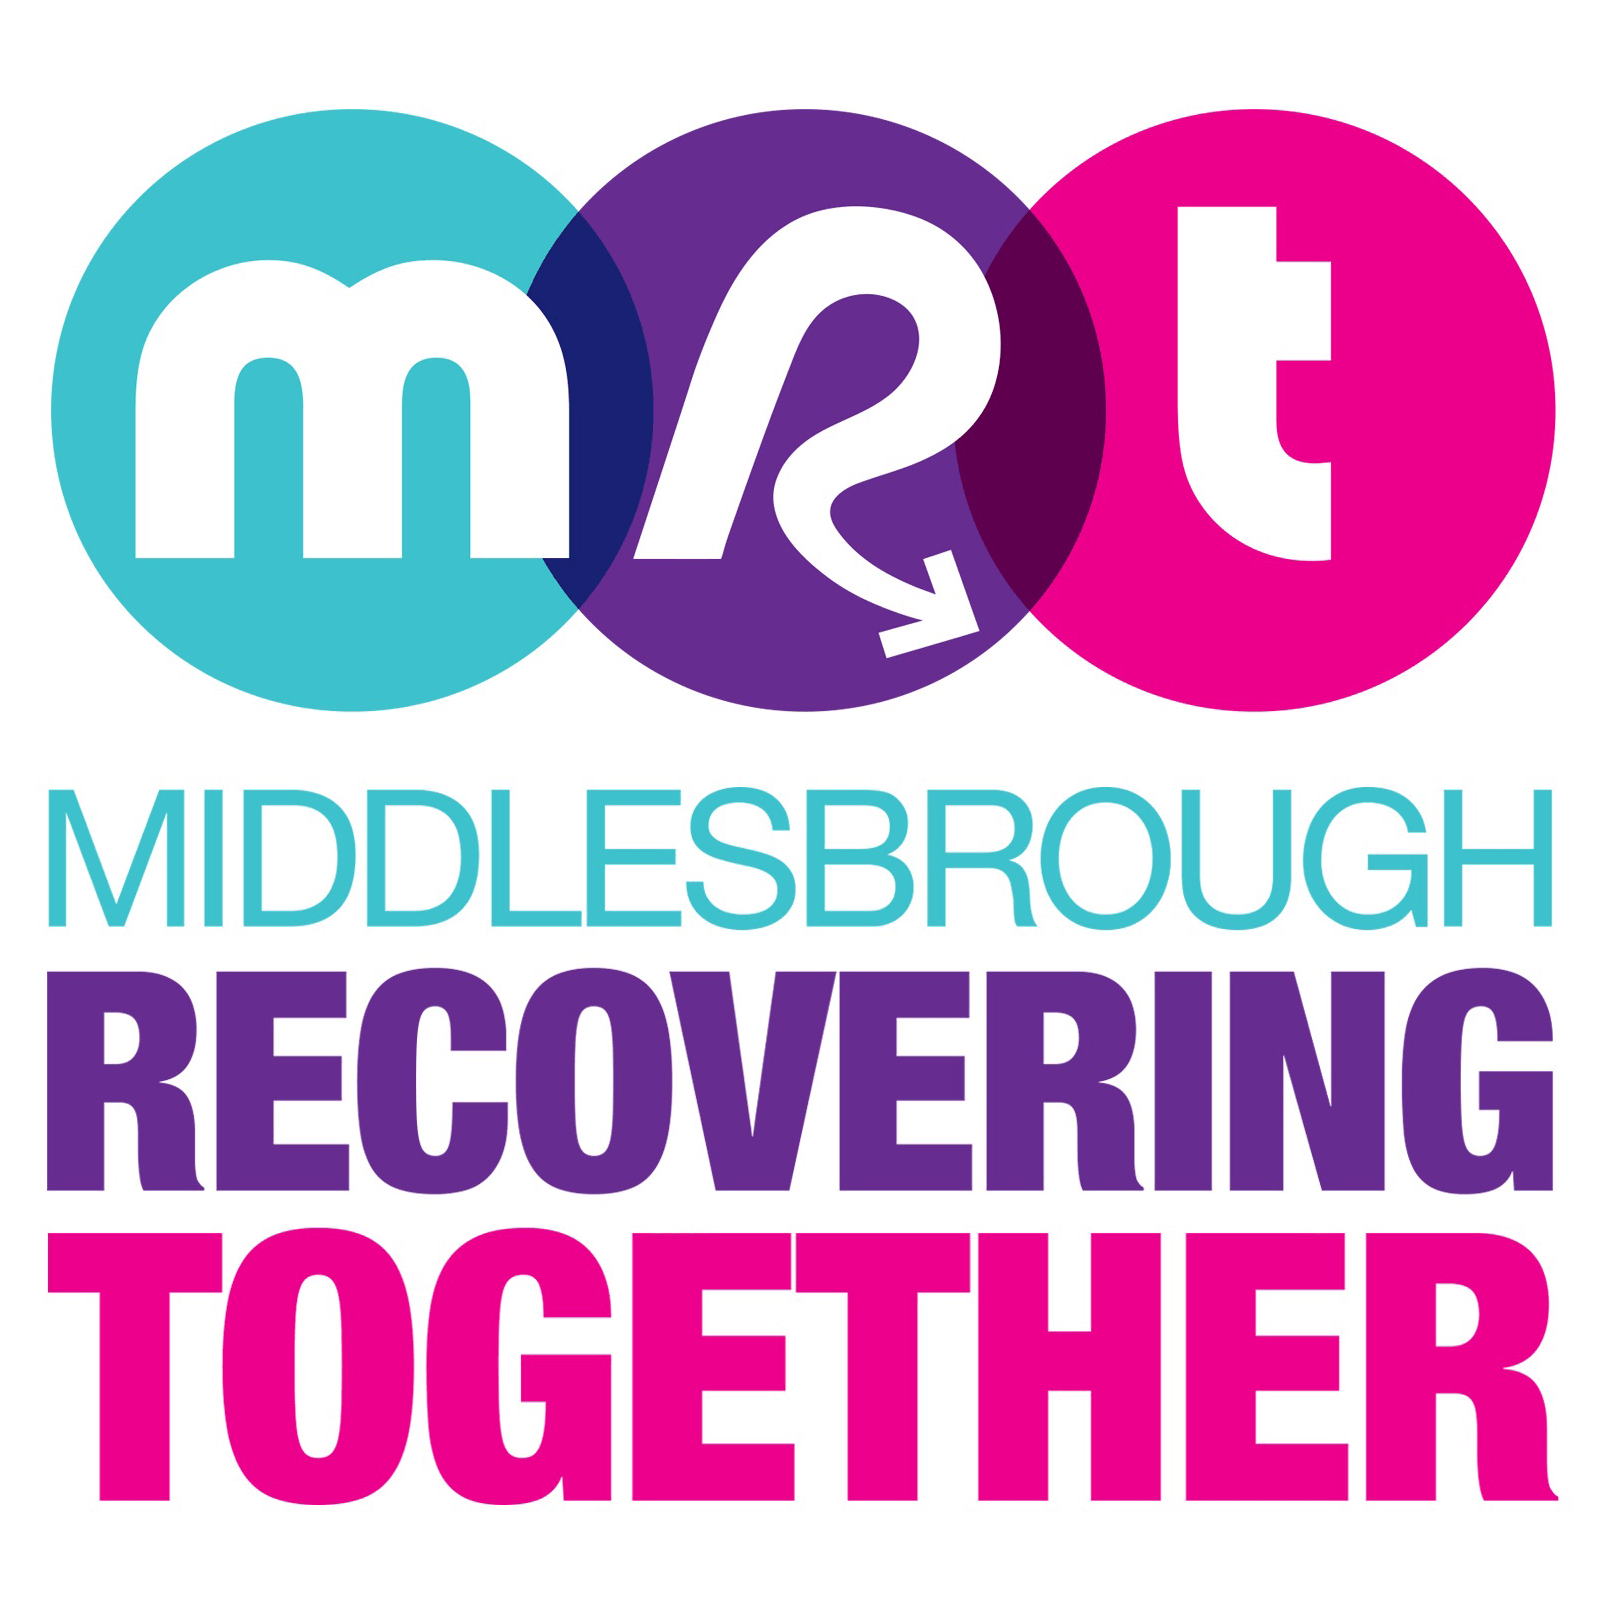 Recovering Logo - CGL Drug & Alcohol Treatment & Care Service - Middlesbrough